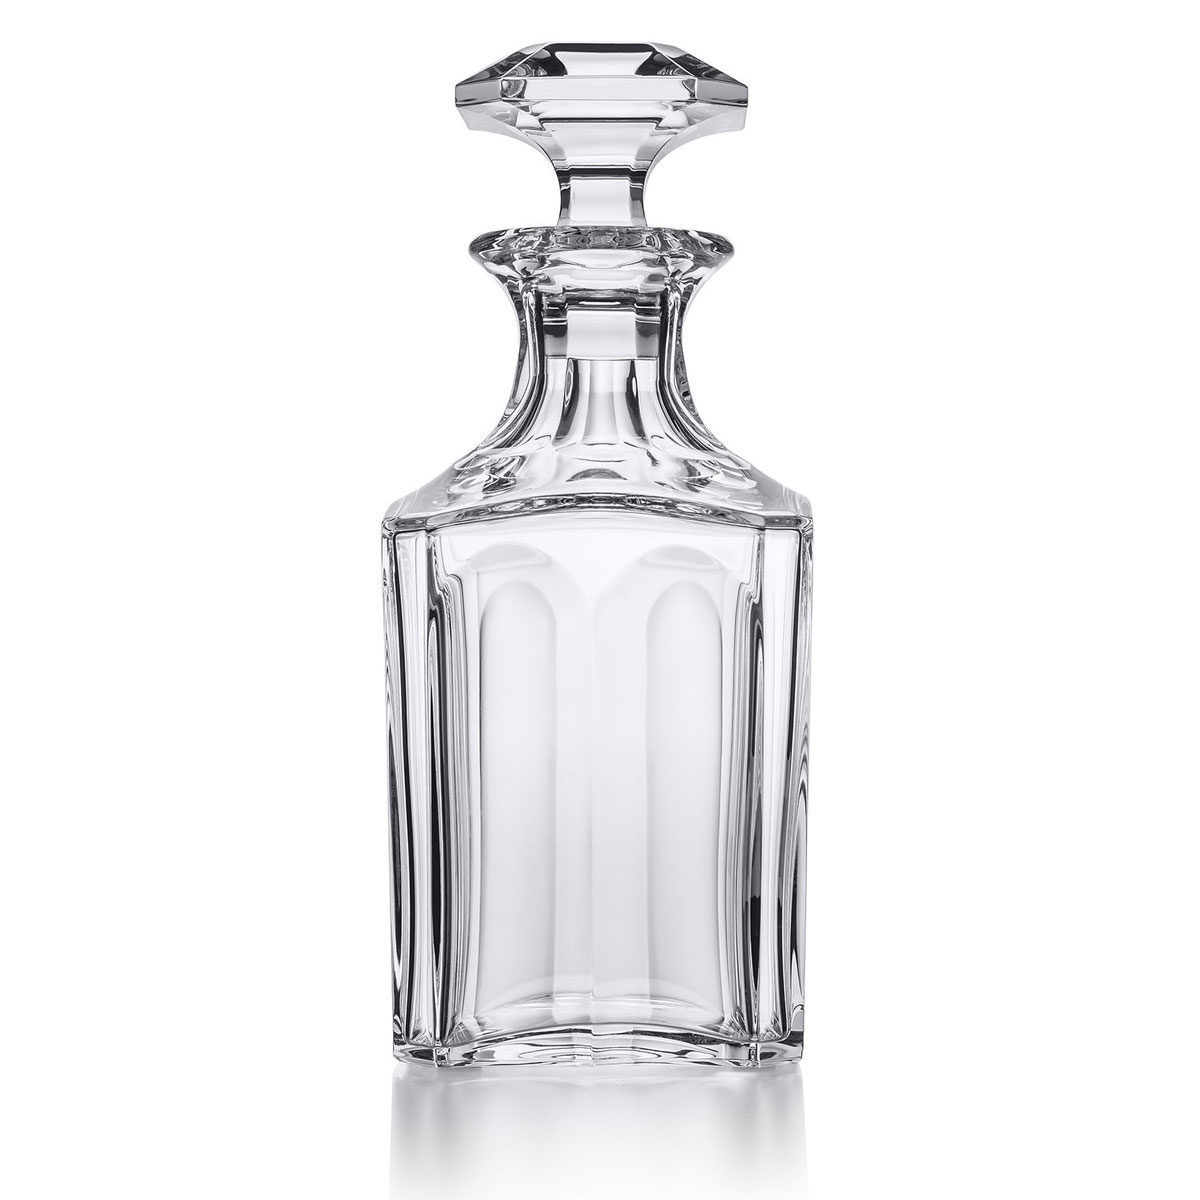 Baccarat Crystal, Harcourt Square Whiskey Decanter